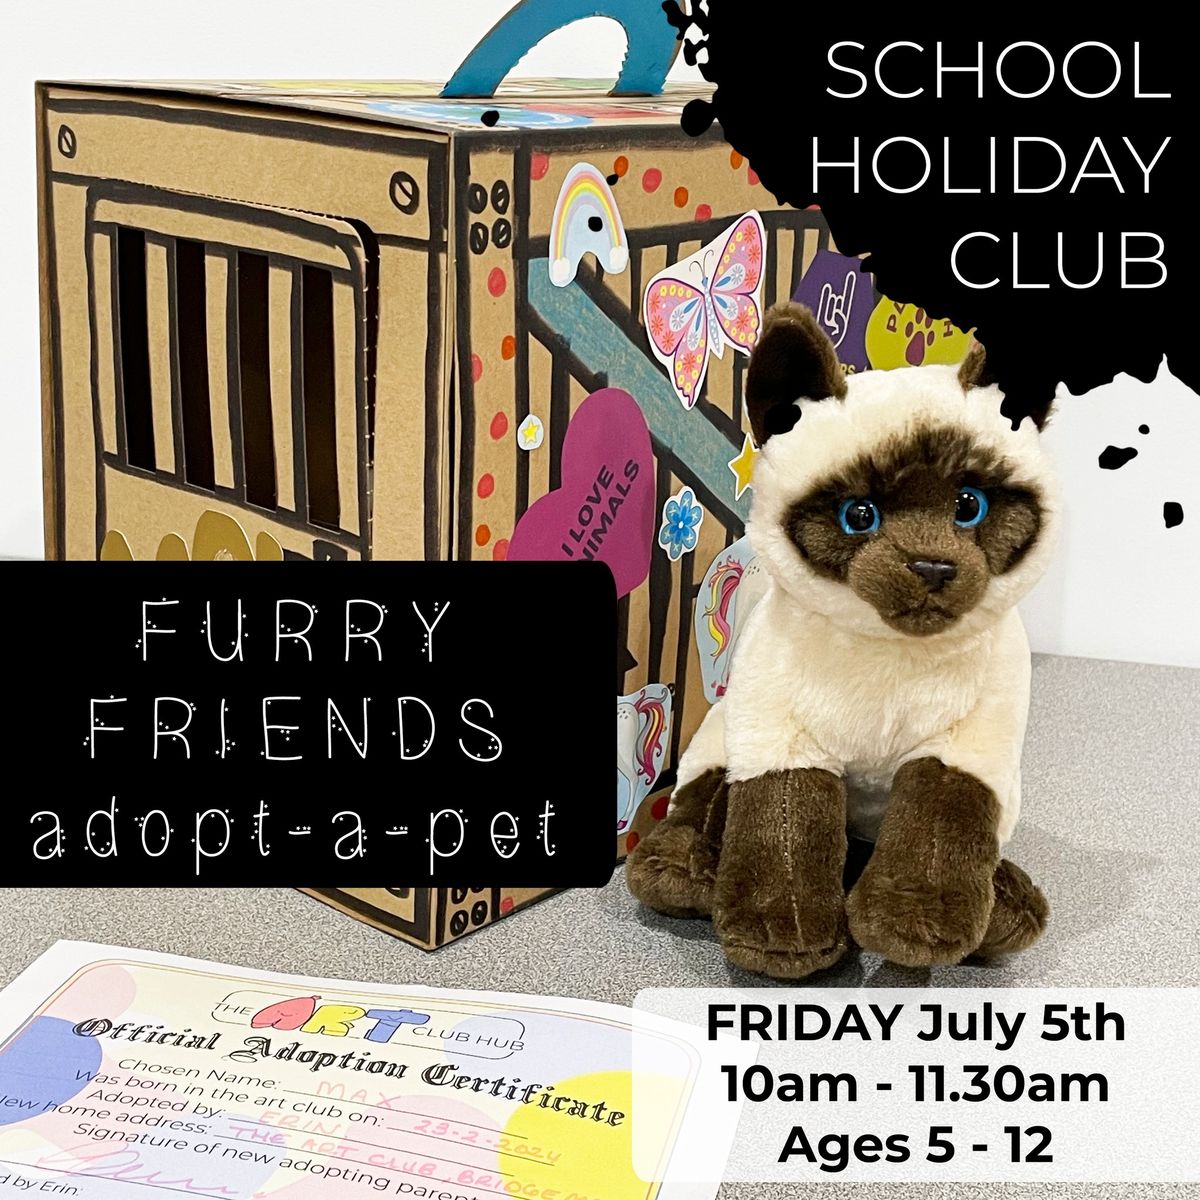 SCHOOL HOLIDAY - Furry Friends - 'adopt-a-pet' - Workshop Ages 5 -12